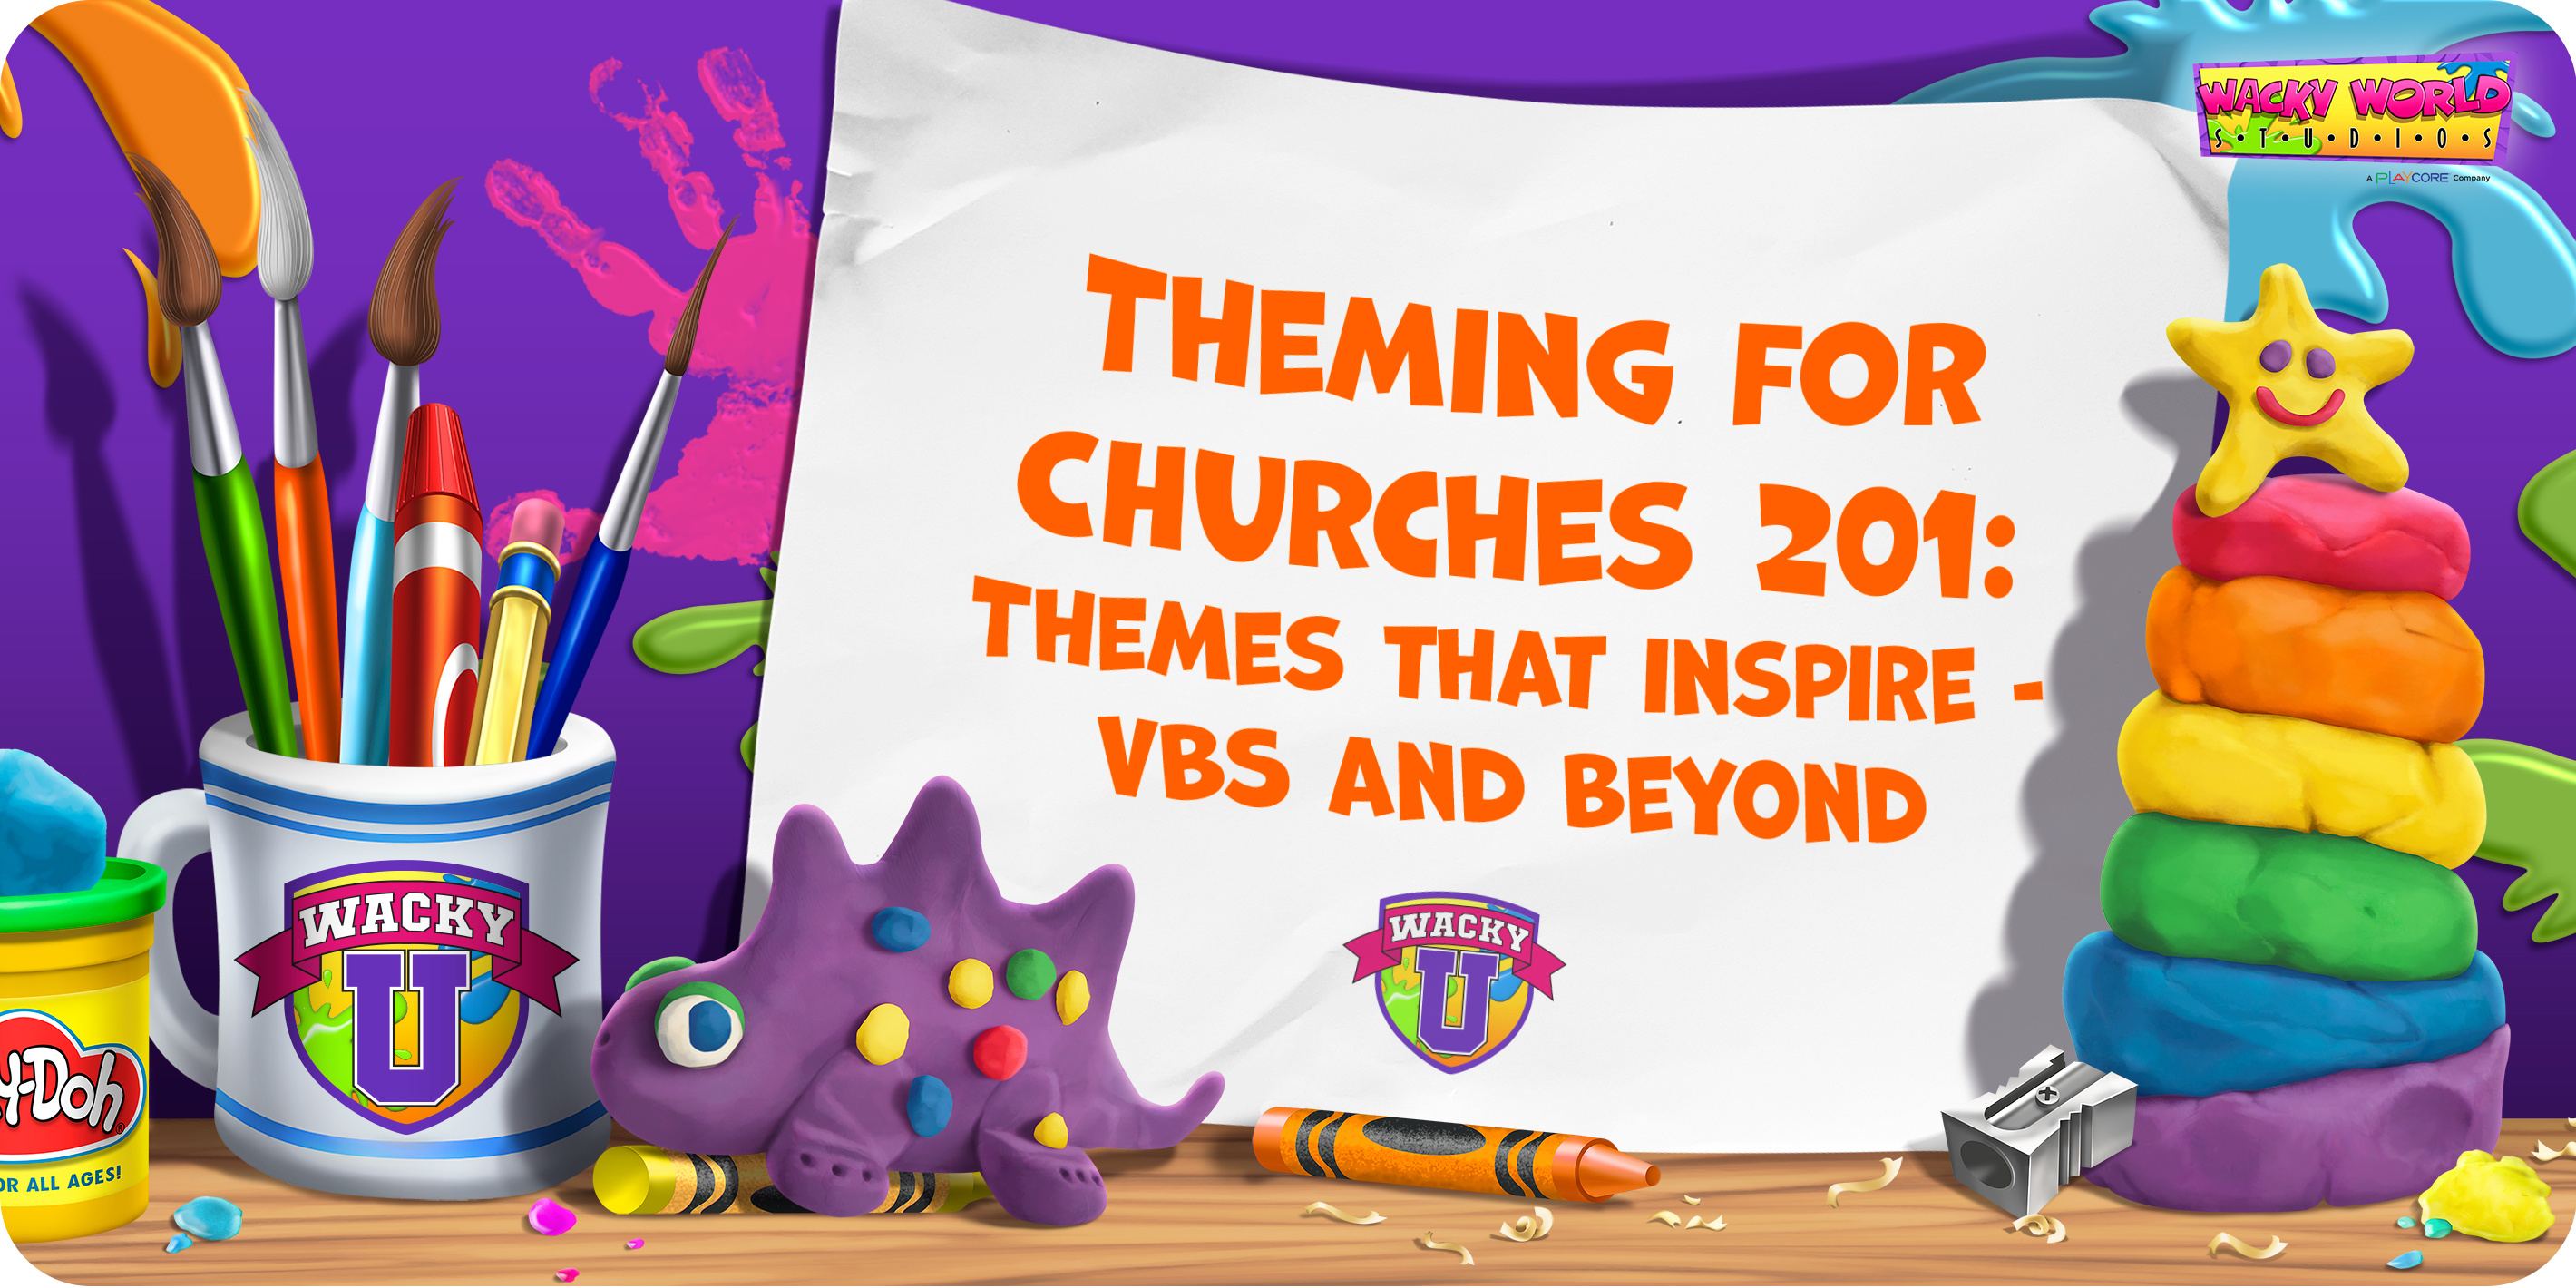 Themes that Inspire: VBS and Beyond